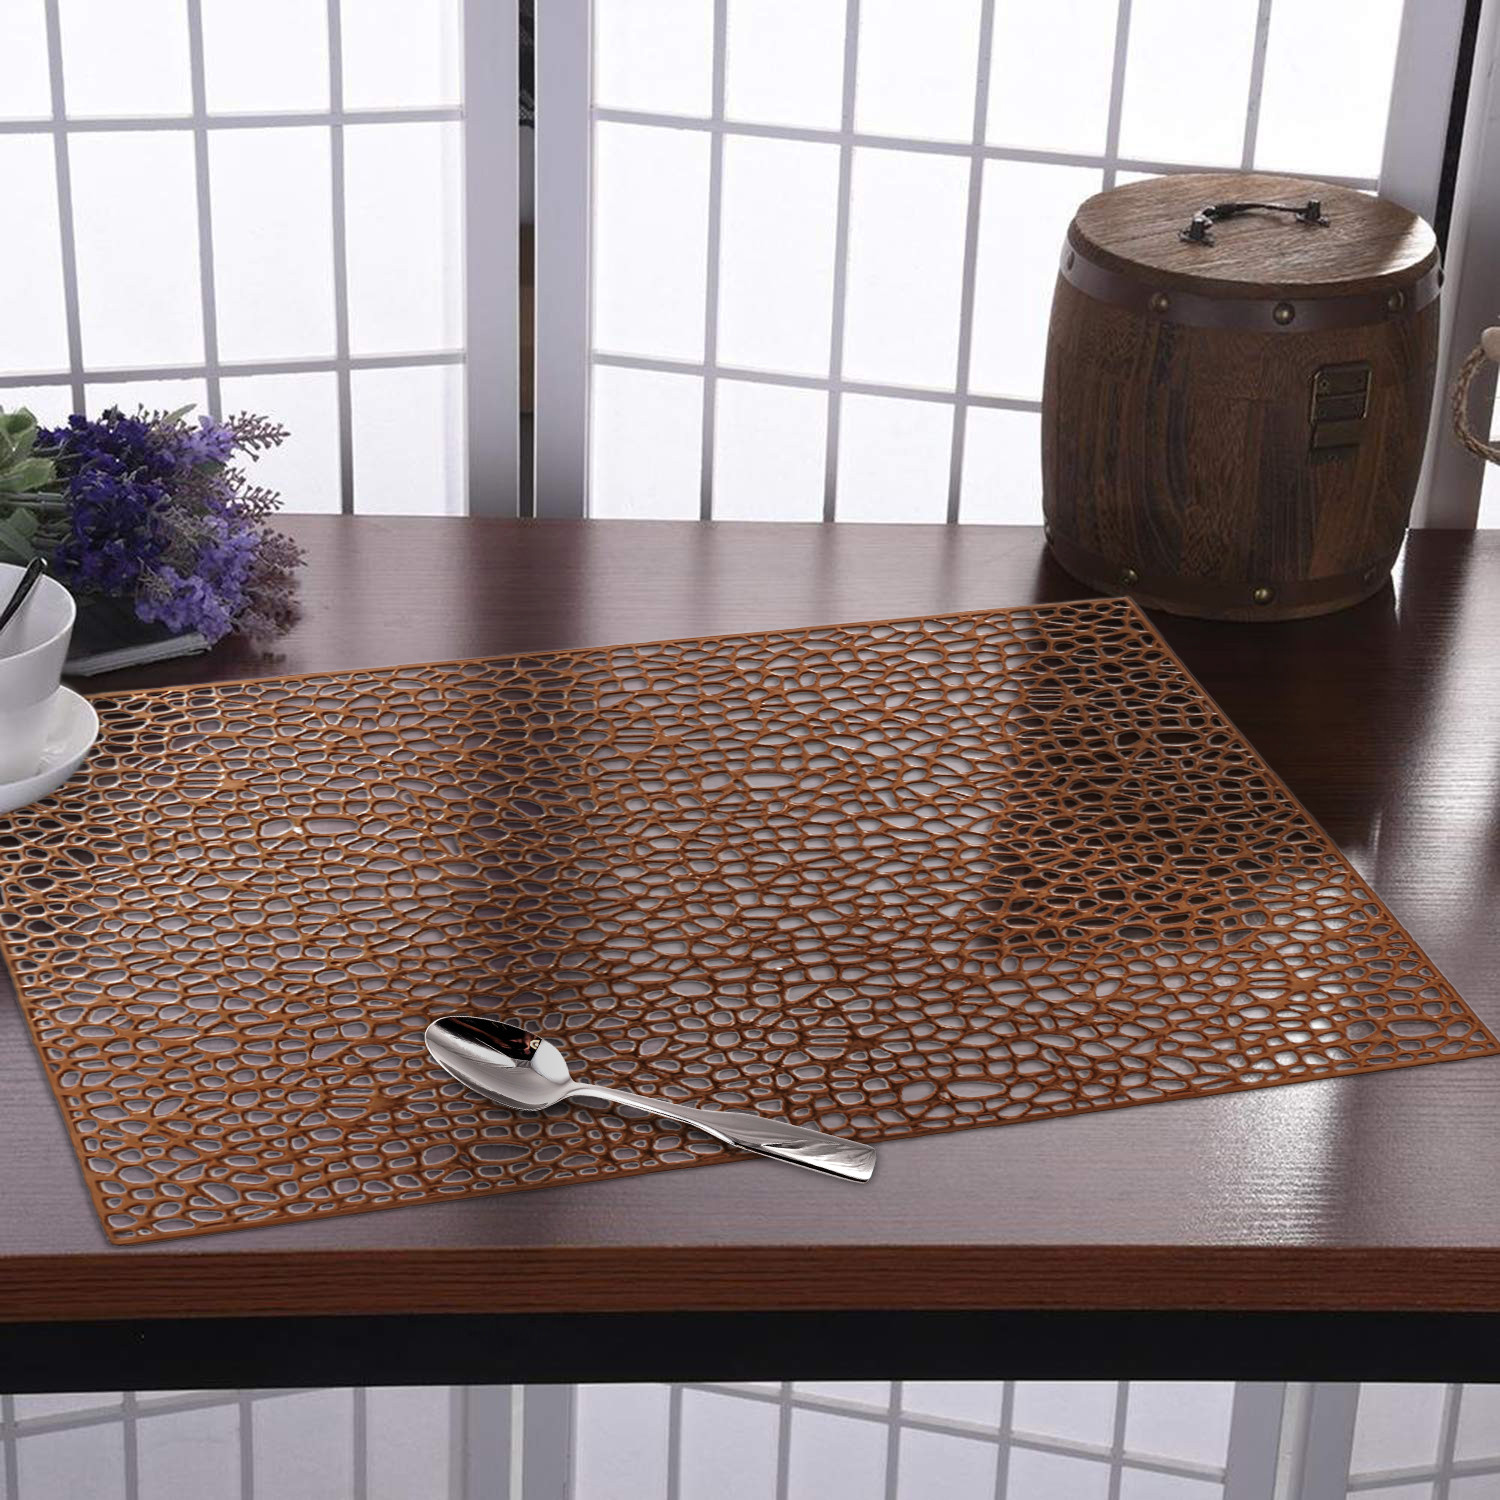 Kuber Industries Multiuses Seamless Holes Design Rubber Rectangle Table Placemat for kitchen, Dining Table Set of 6 (Copper)